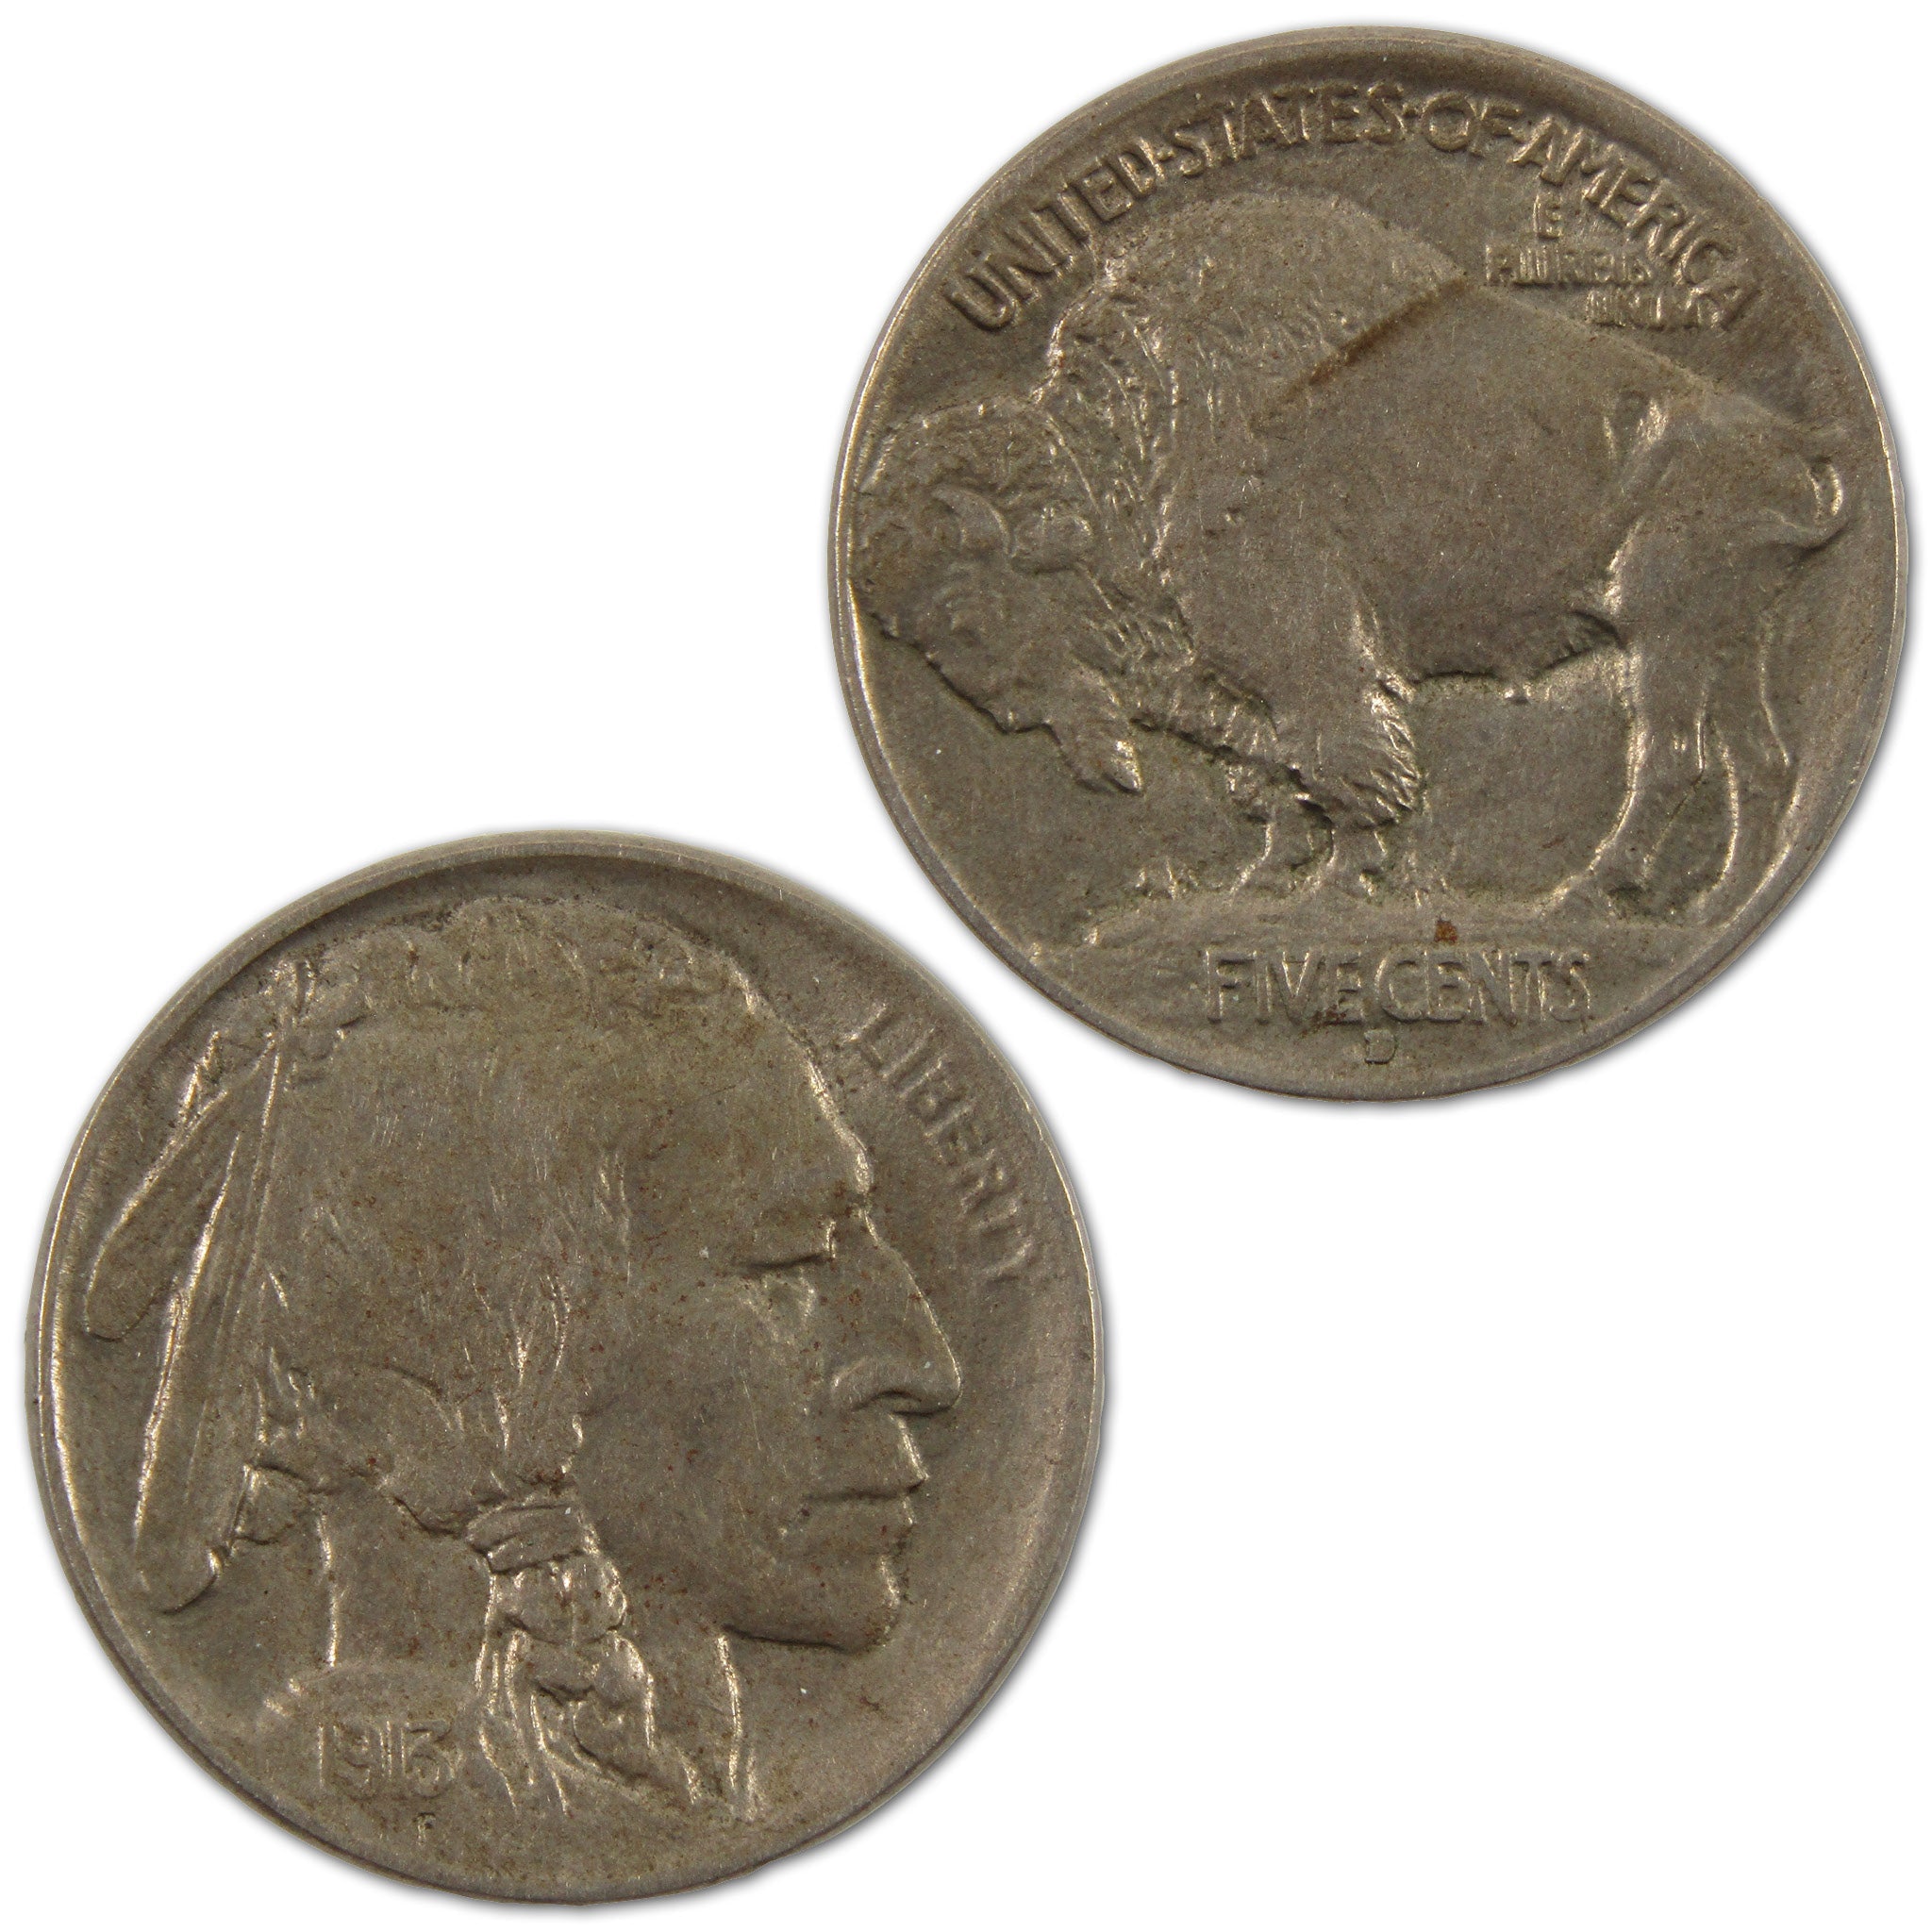 1913 D Type 1 Buffalo Nickel AU About Uncirculated 5c Coin SKU:I10585